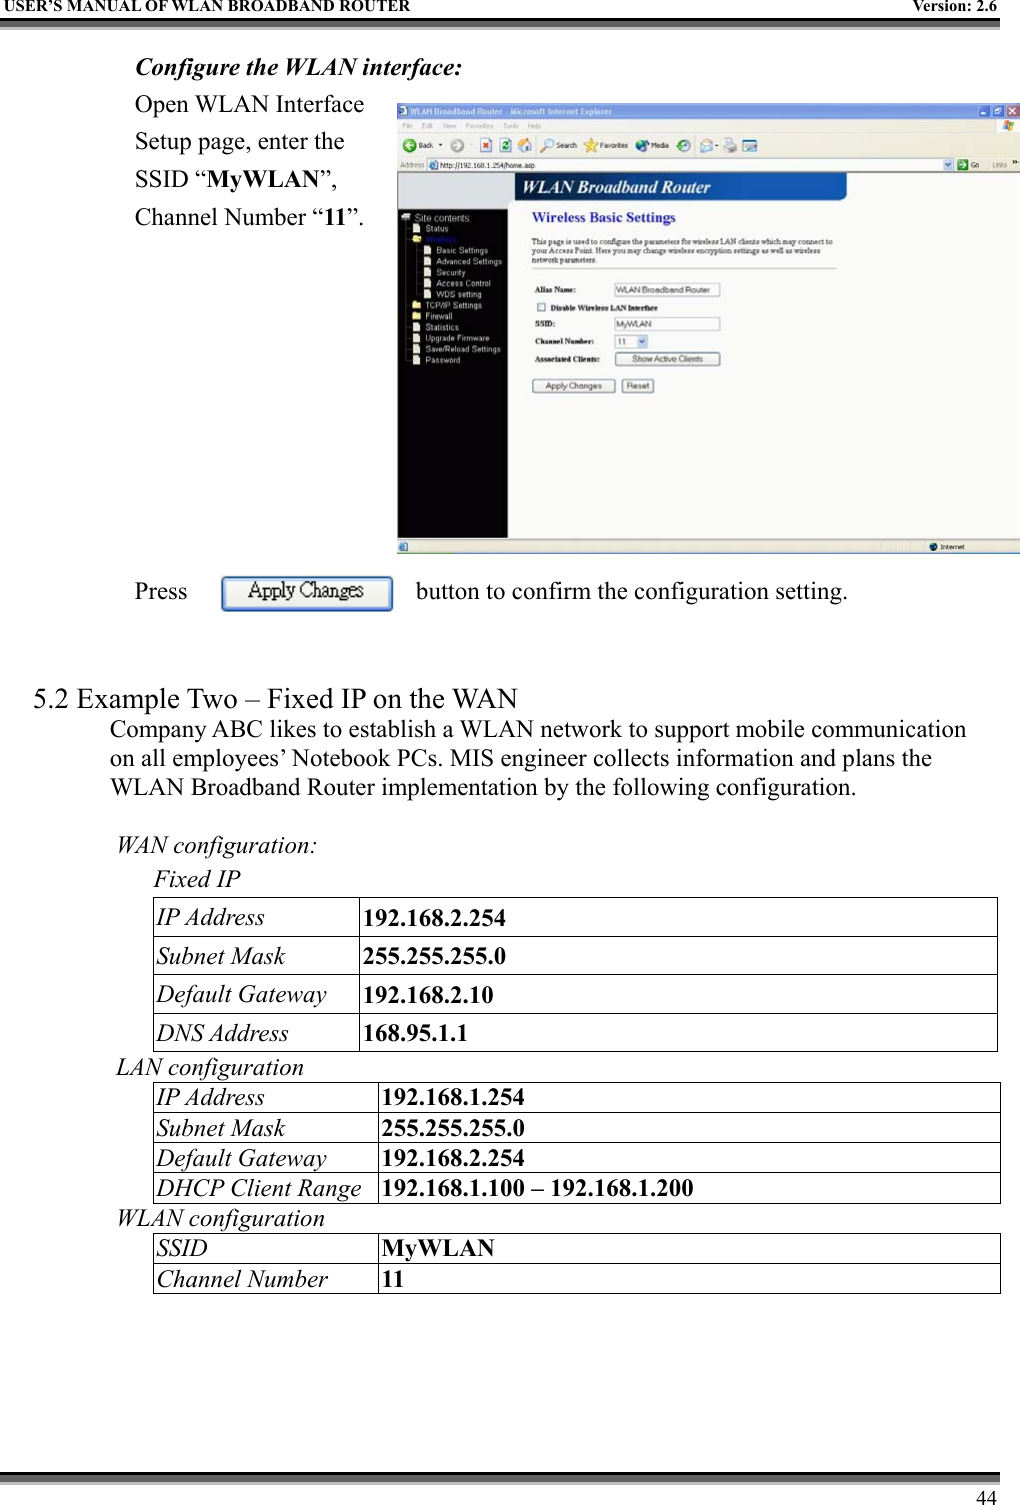   USER’S MANUAL OF WLAN BROADBAND ROUTER    Version: 2.6     44 Configure the WLAN interface:  Open WLAN Interface Setup page, enter the SSID “MyWLAN”, Channel Number “11”.          Press  button to confirm the configuration setting.   5.2 Example Two – Fixed IP on the WAN Company ABC likes to establish a WLAN network to support mobile communication on all employees’ Notebook PCs. MIS engineer collects information and plans the WLAN Broadband Router implementation by the following configuration.  WAN configuration:   Fixed IP IP Address  192.168.2.254 Subnet Mask  255.255.255.0 Default Gateway  192.168.2.10 DNS Address  168.95.1.1 LAN configuration IP Address  192.168.1.254 Subnet Mask  255.255.255.0 Default Gateway  192.168.2.254 DHCP Client Range  192.168.1.100 – 192.168.1.200 WLAN configuration SSID  MyWLAN Channel Number  11 